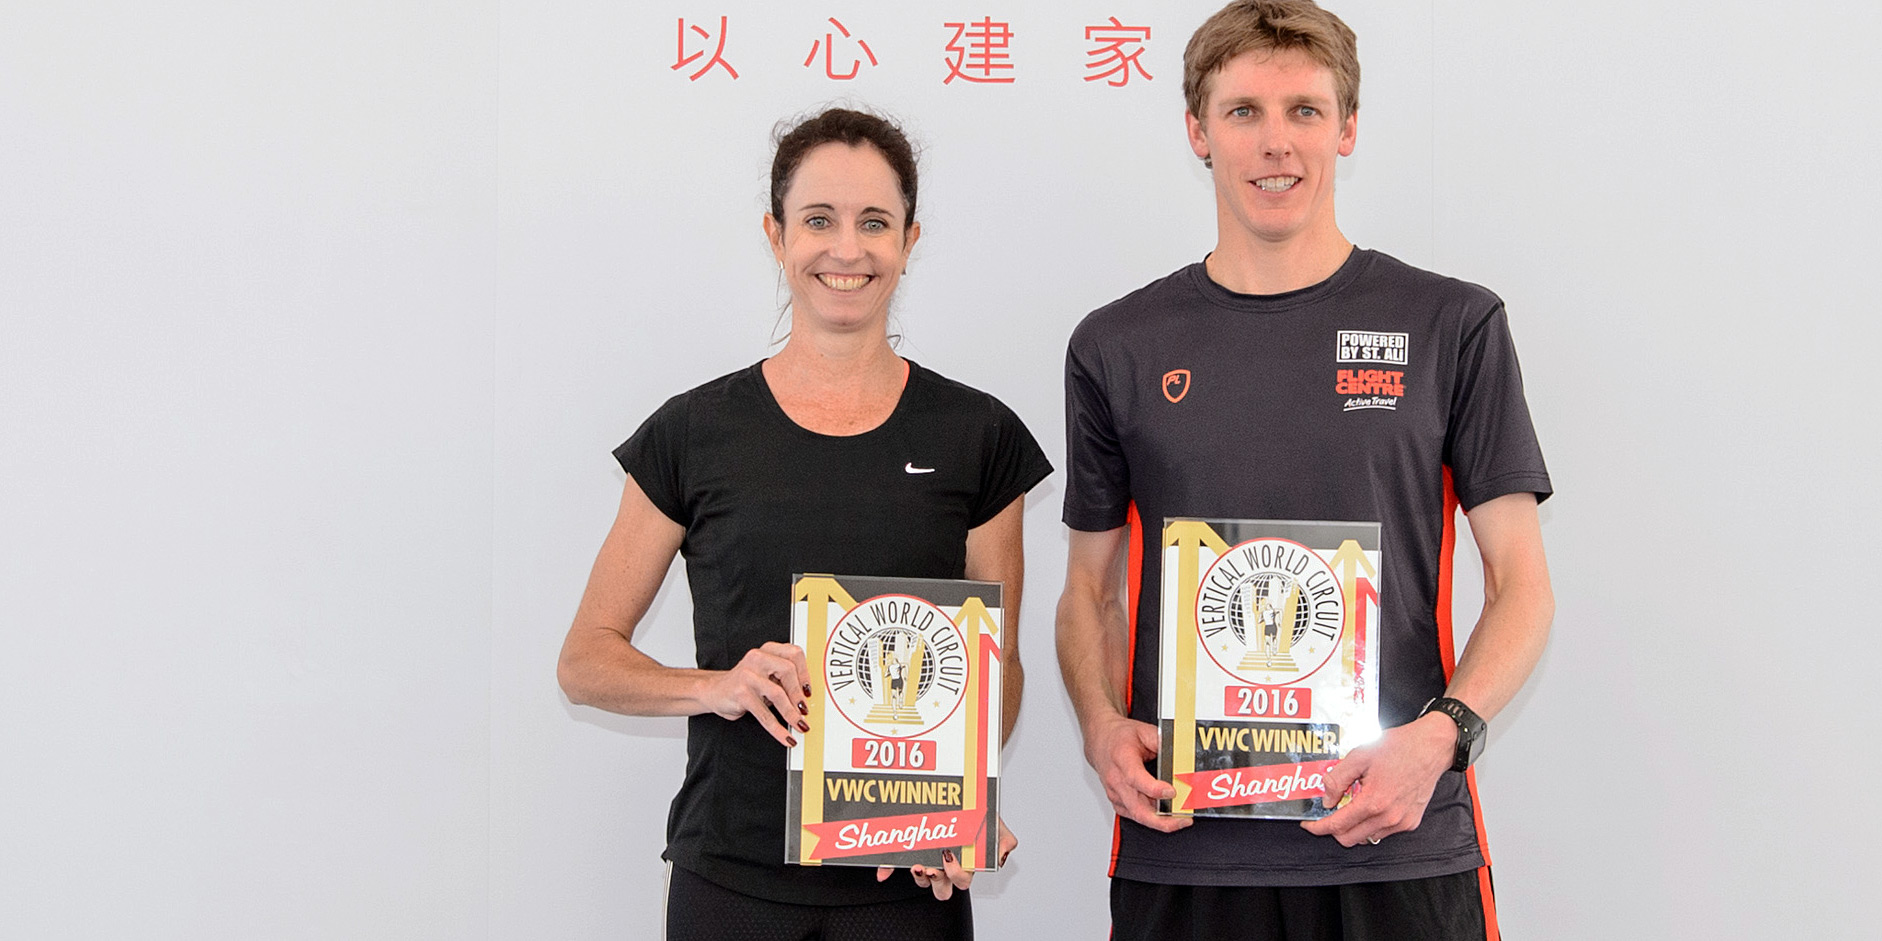 Race winners and new record holders at SHKP Vertical Run for Charity - Race to Shanghai IFC, Suzy Walsham and Mark Bourne. ©Sporting Republic 